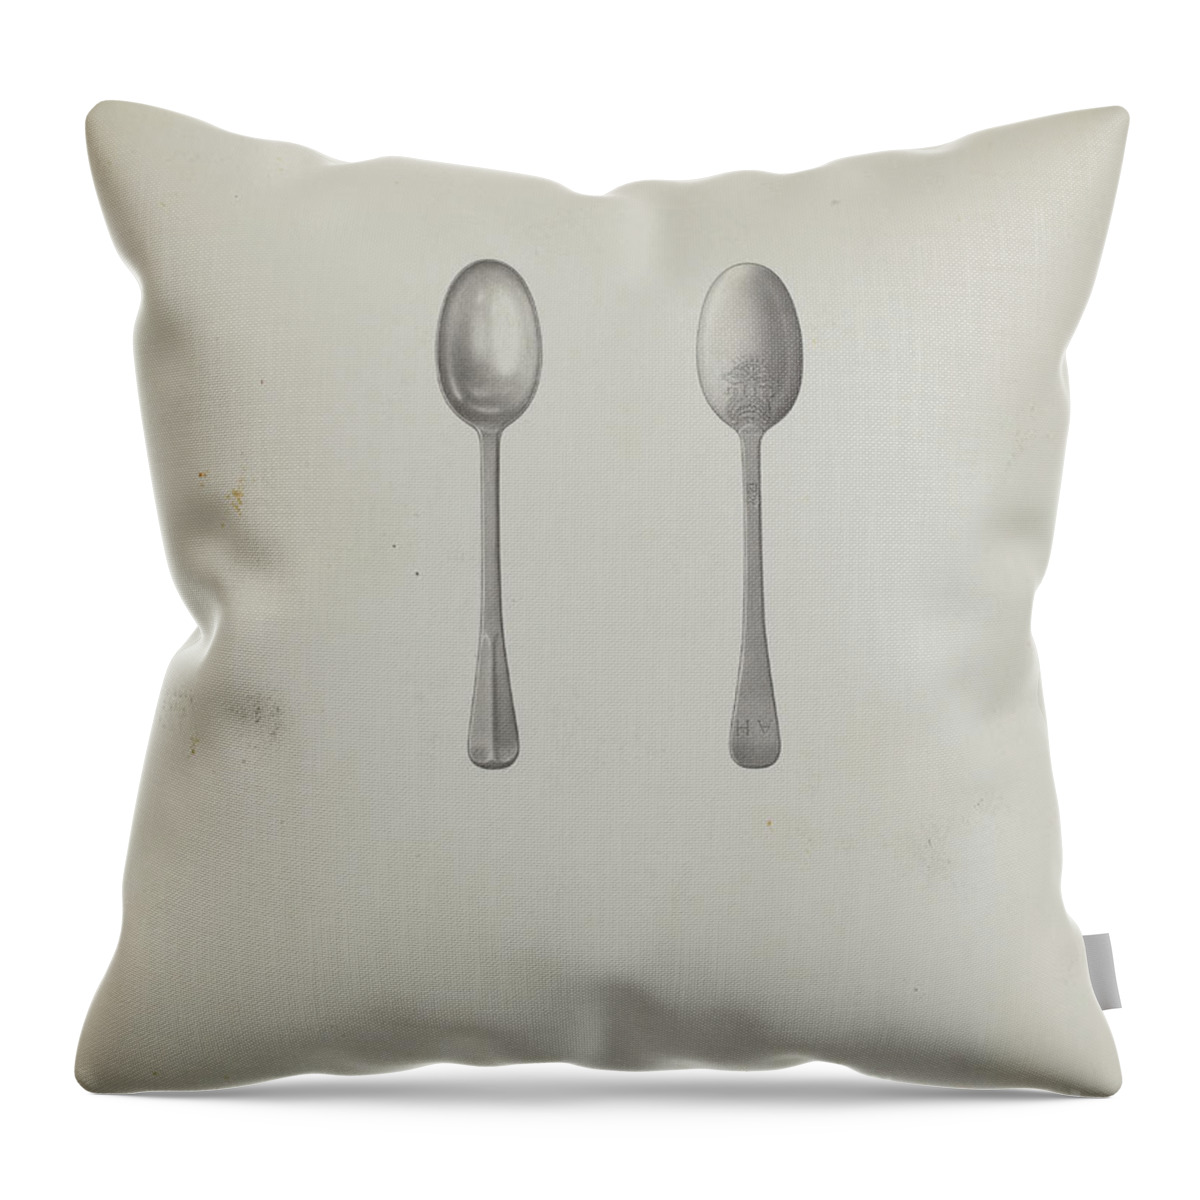  Throw Pillow featuring the drawing Silver Teaspoon by David P Willoughby